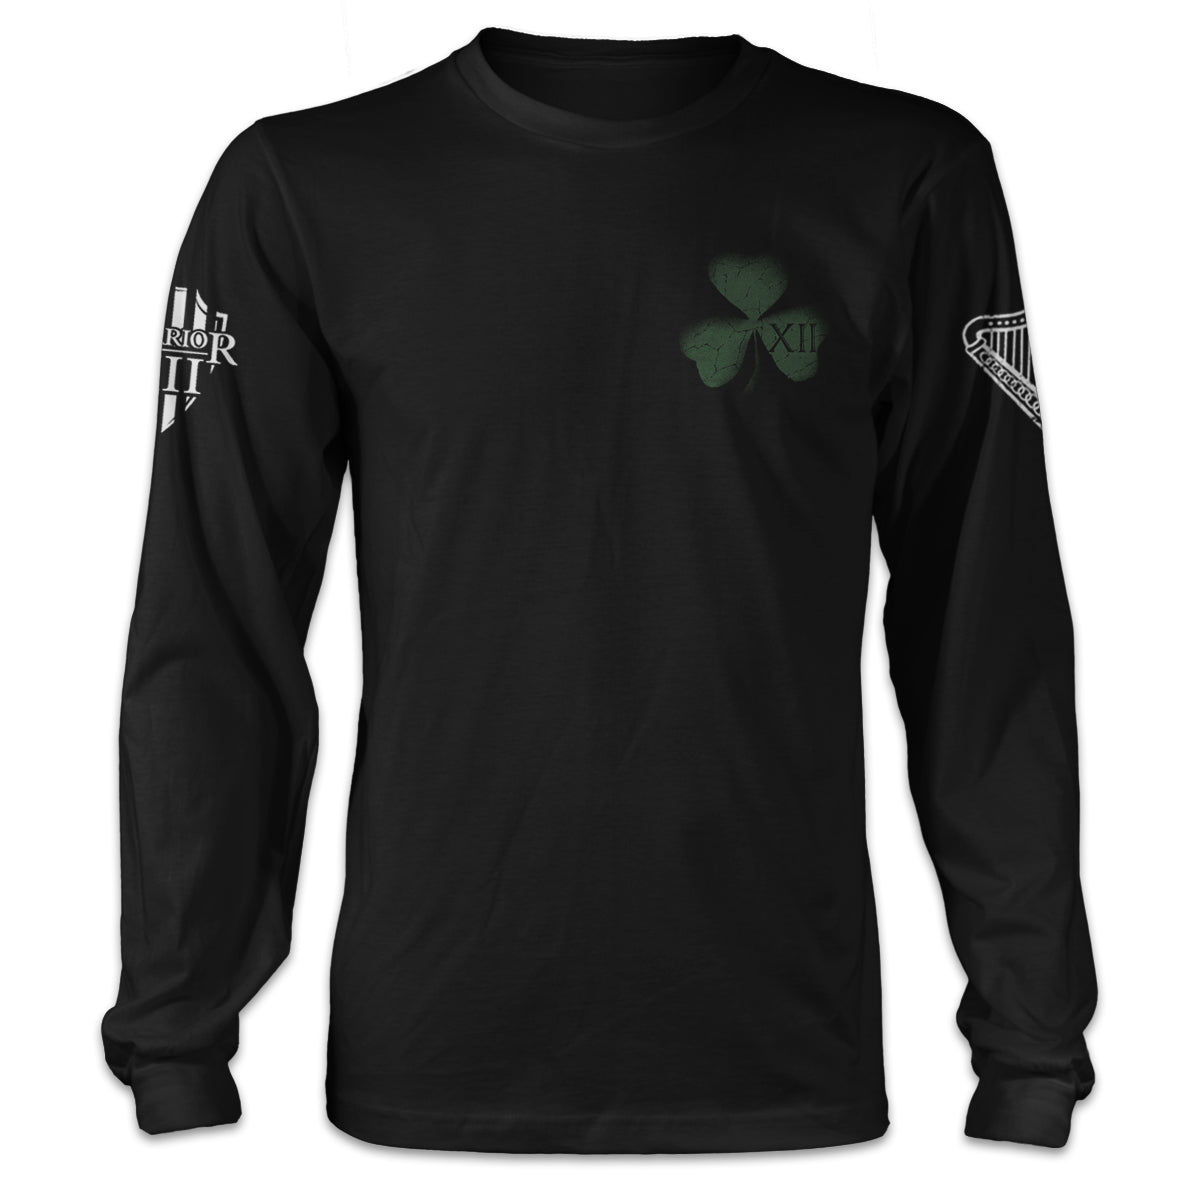 A black long sleeve shirt with a green clover printed on the front.